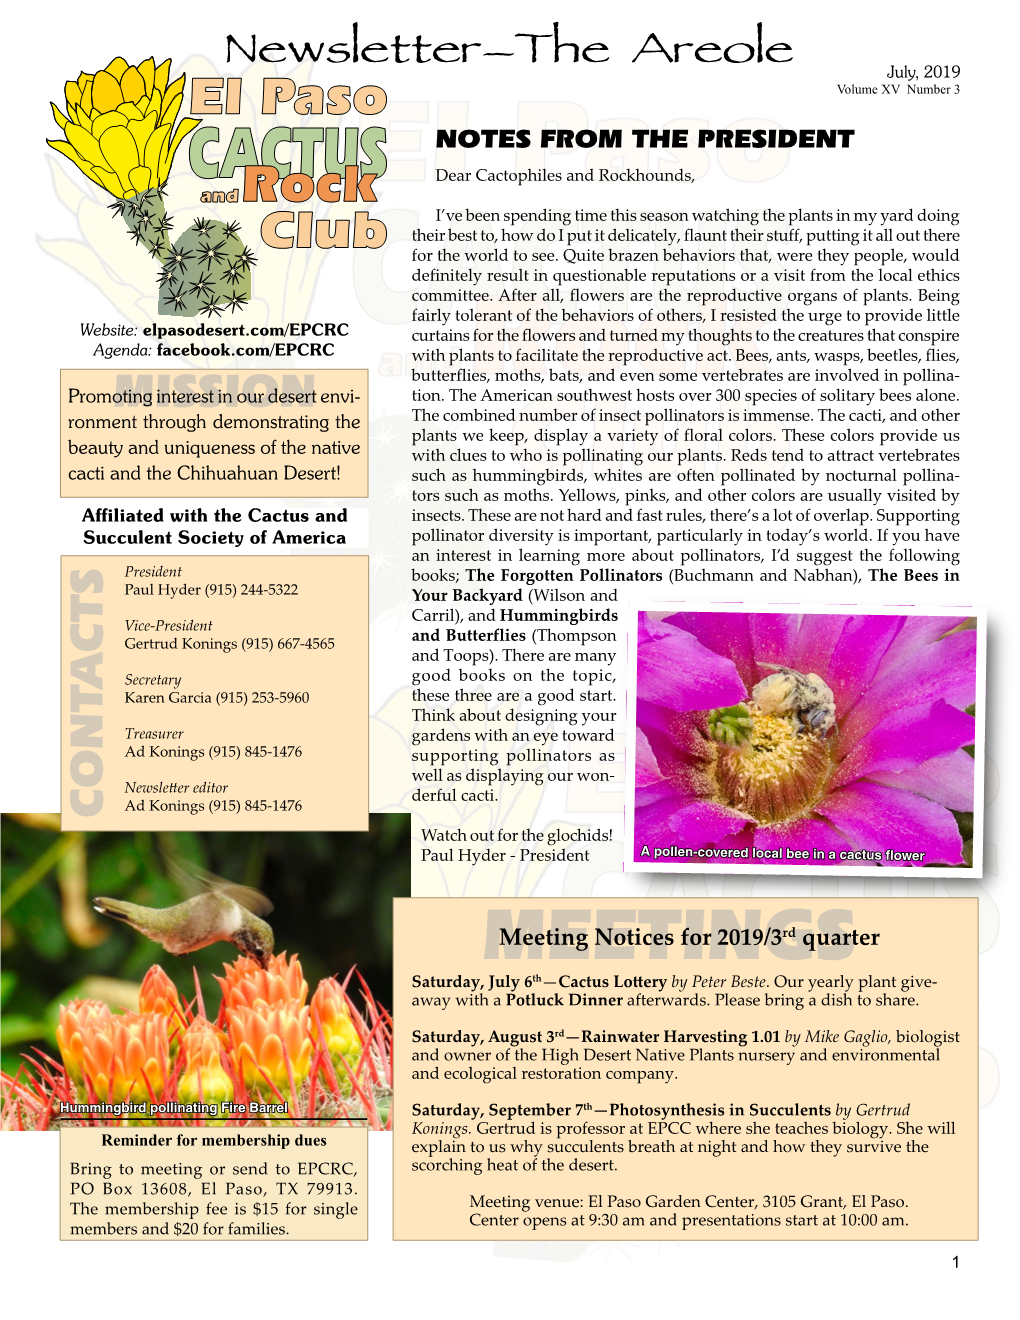 The EPCRC July Newsletter